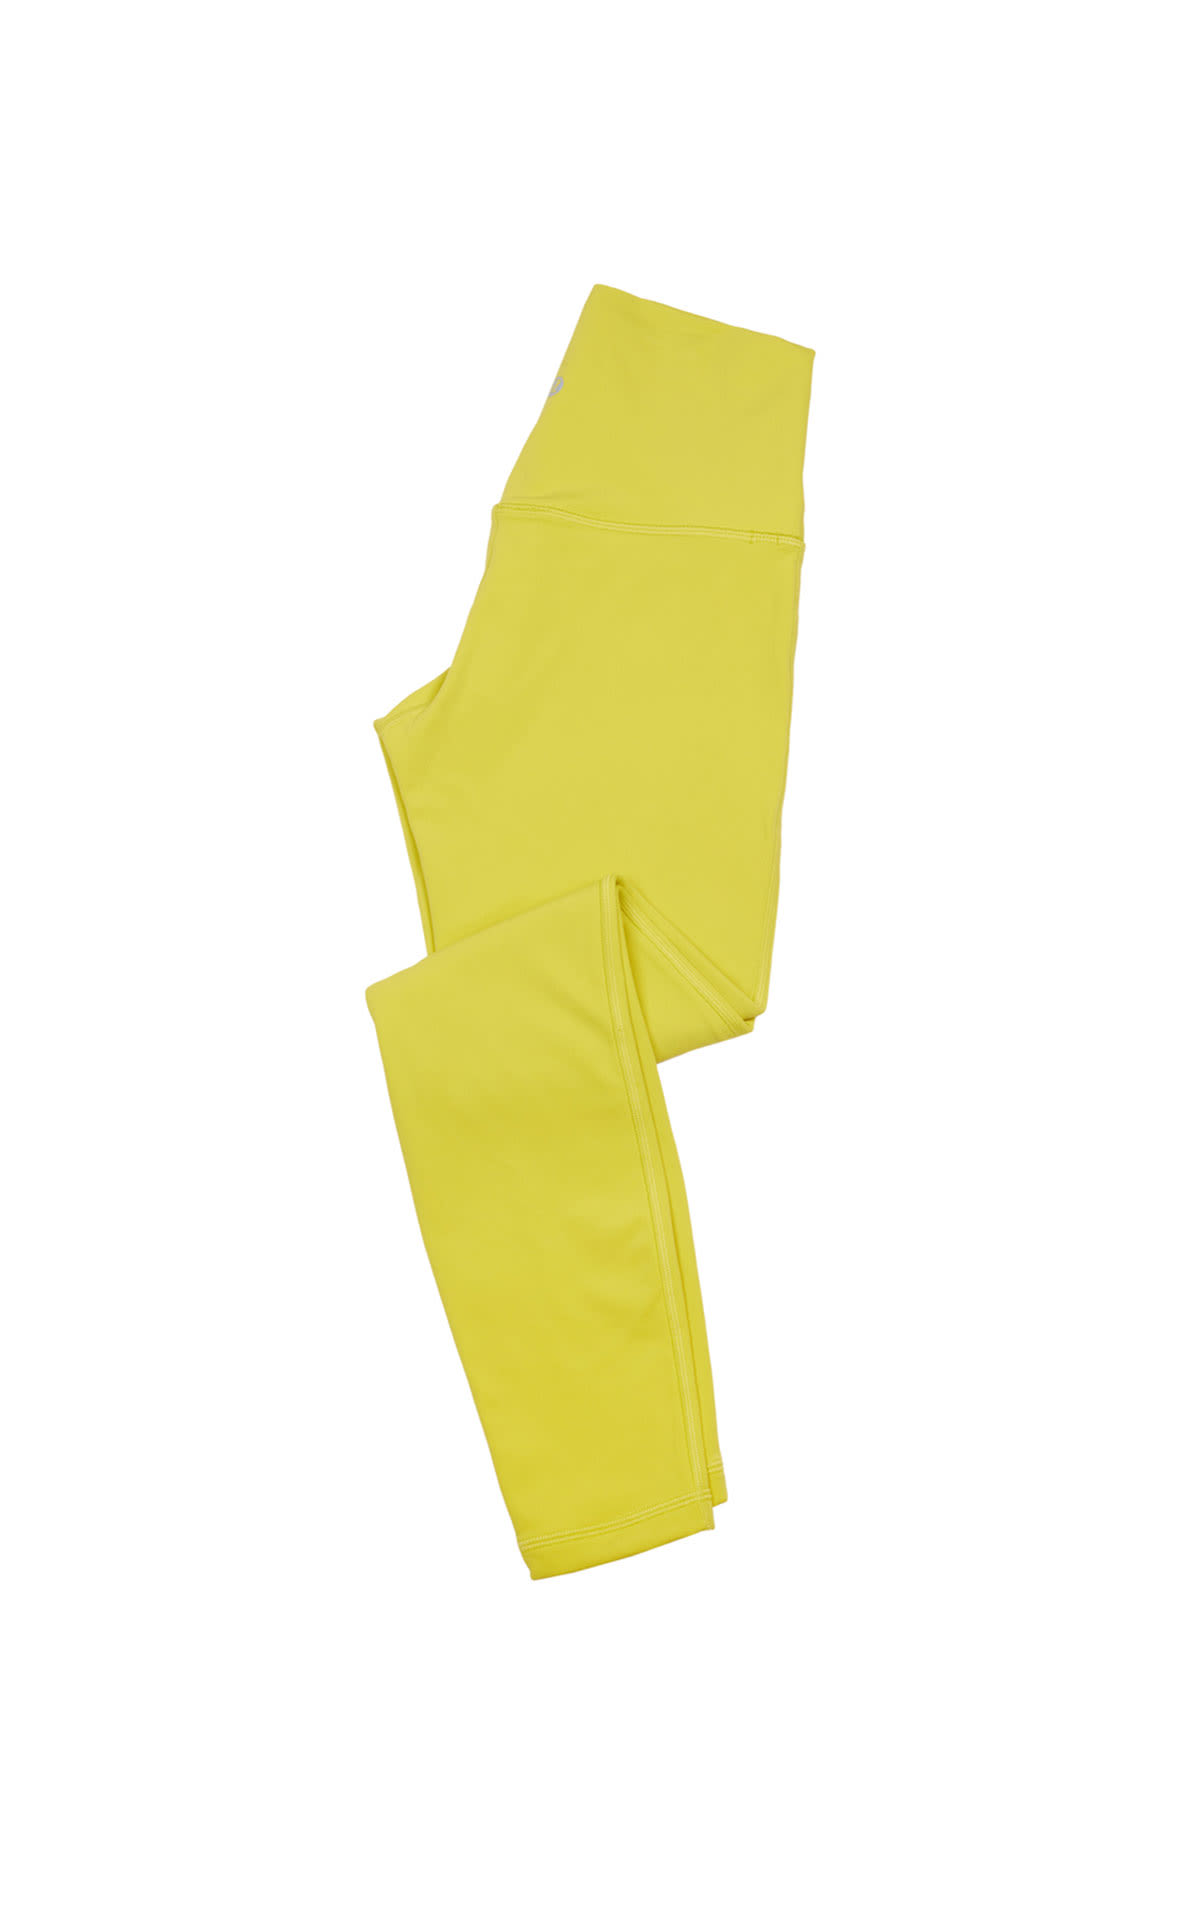 lululemon Align HR pant 25 inch yellow from Bicester Village